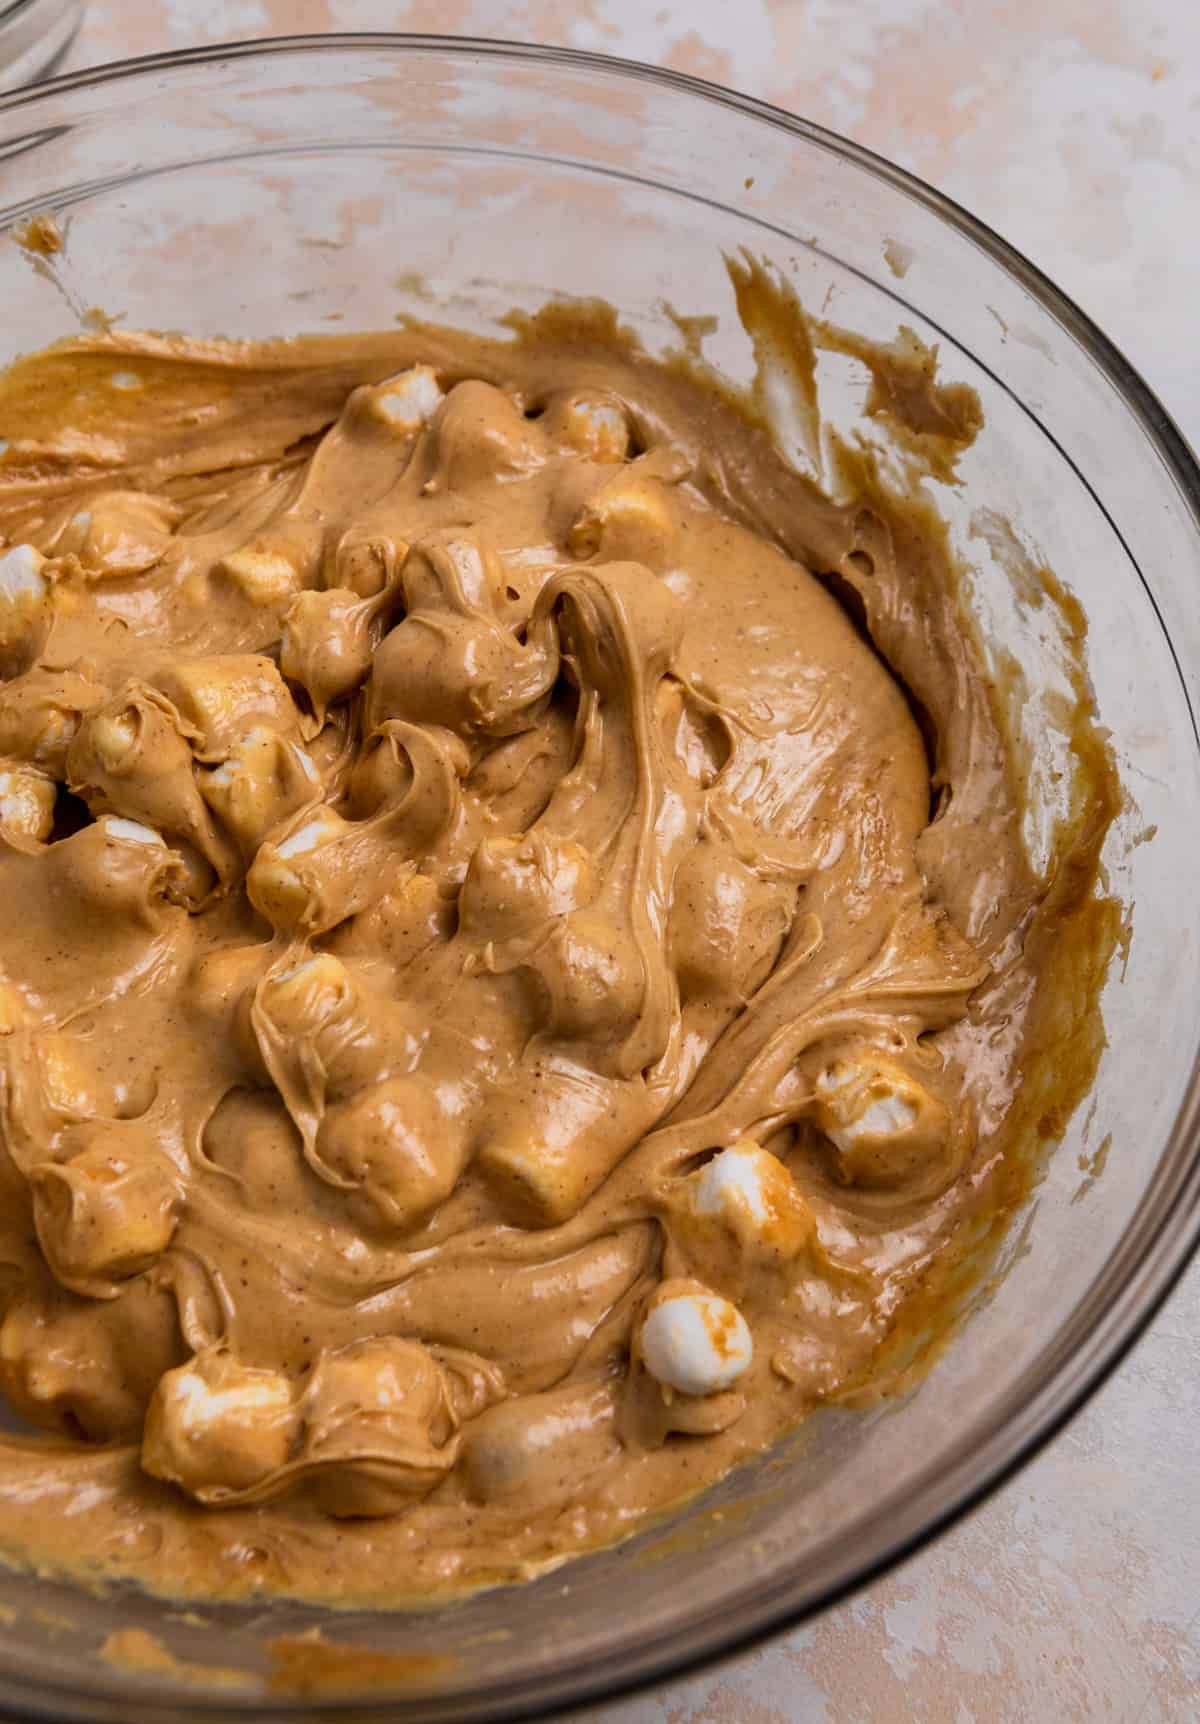 Peanut butter fudge mixed in bowl with marhsmallows.